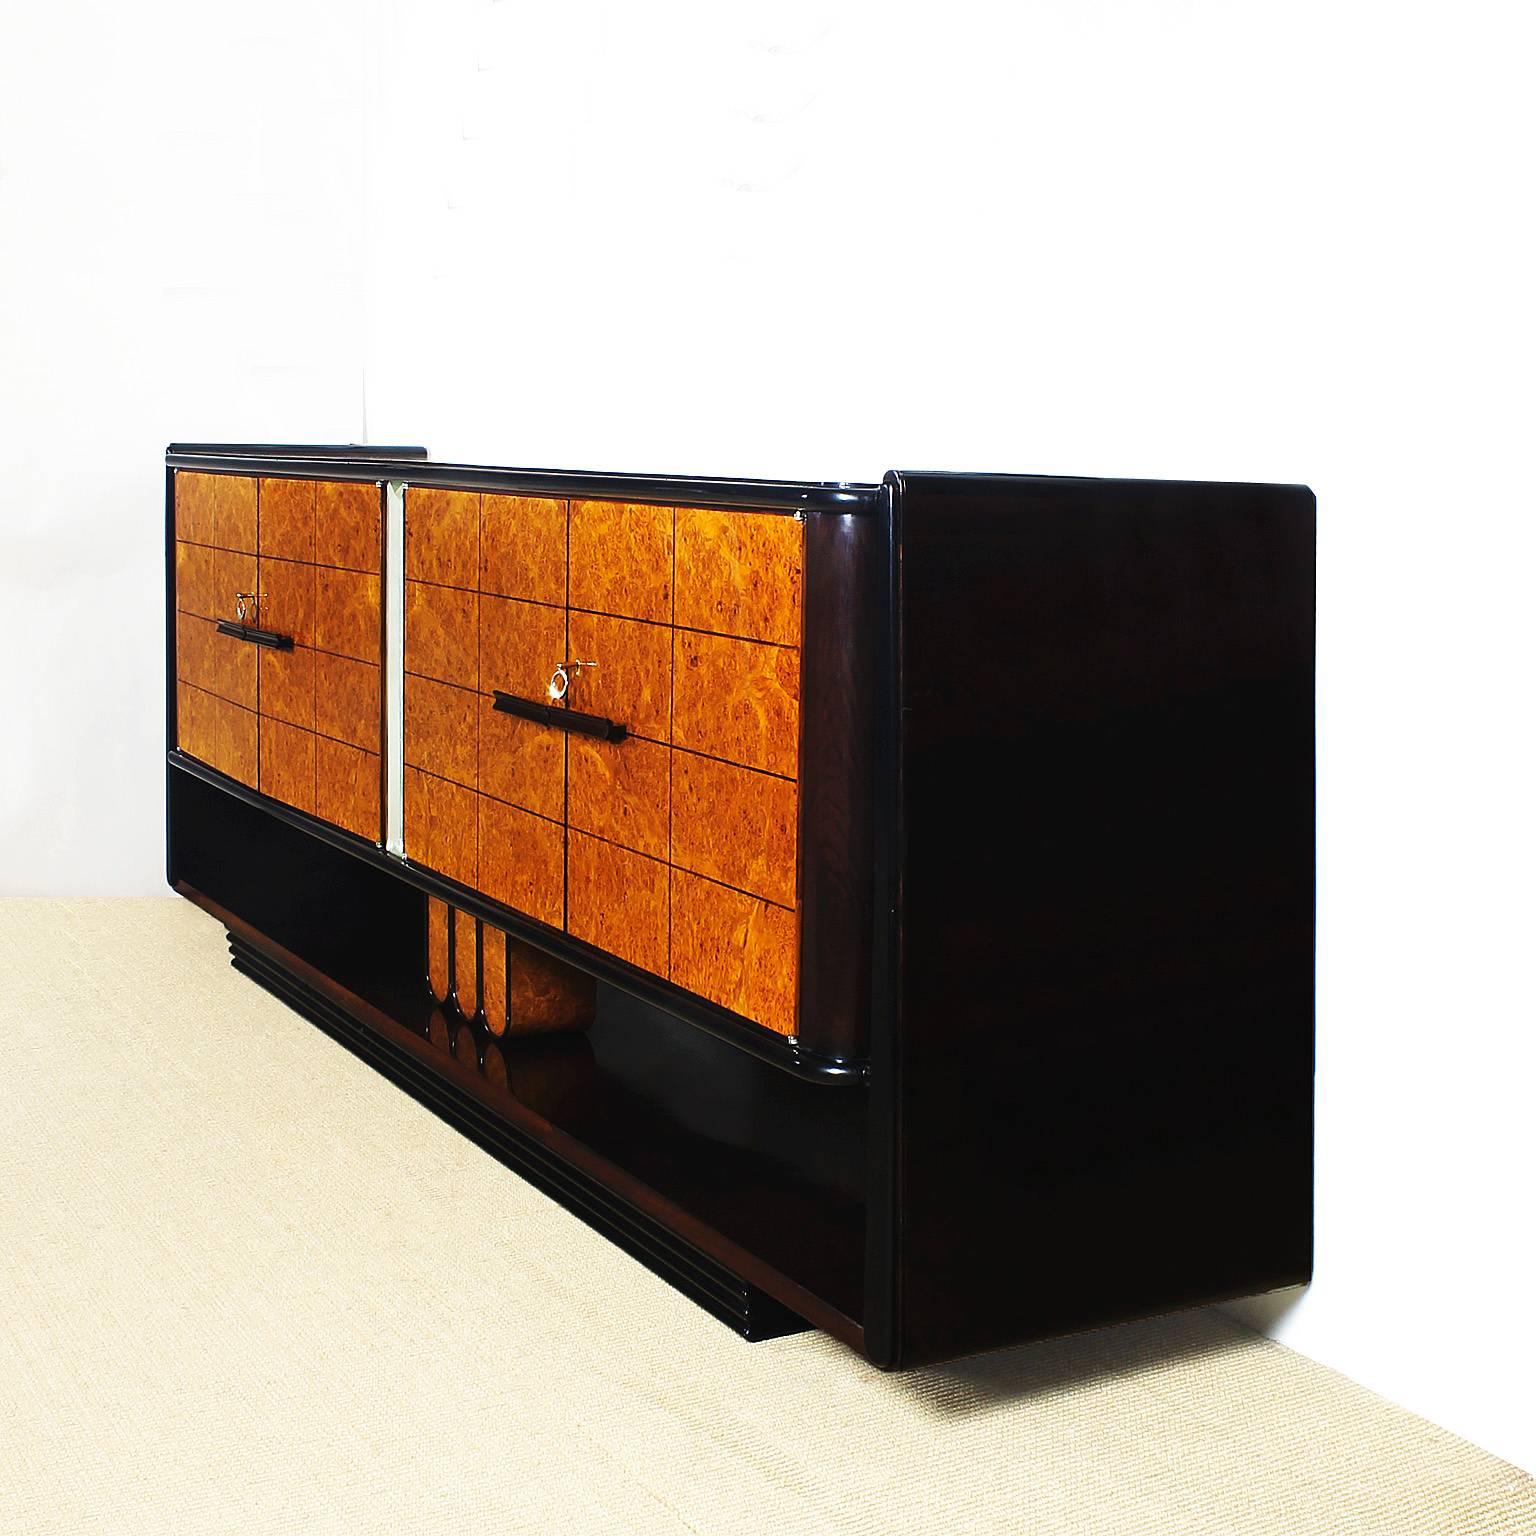 Important Art Deco sideboard with four doors, elm and rosewood veneer and black lacquer, French polish, blond mahogany and rosewood inside, solid rosewood handles, beveled mirror decoration between the doors, nickel plated brass keys.

Attributed